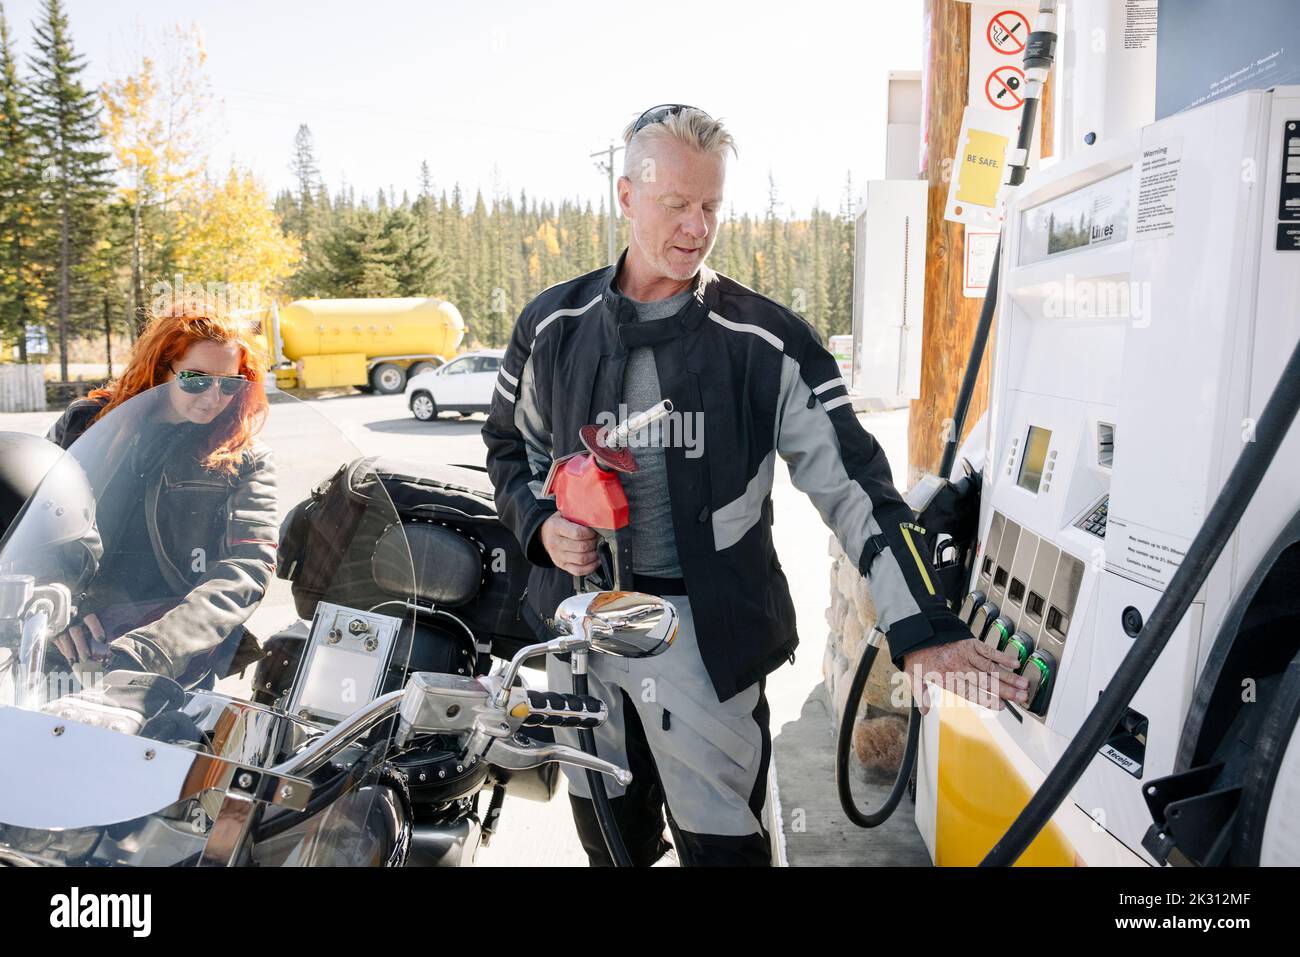 Motorcyclists refuelling at gas station Stock Photo